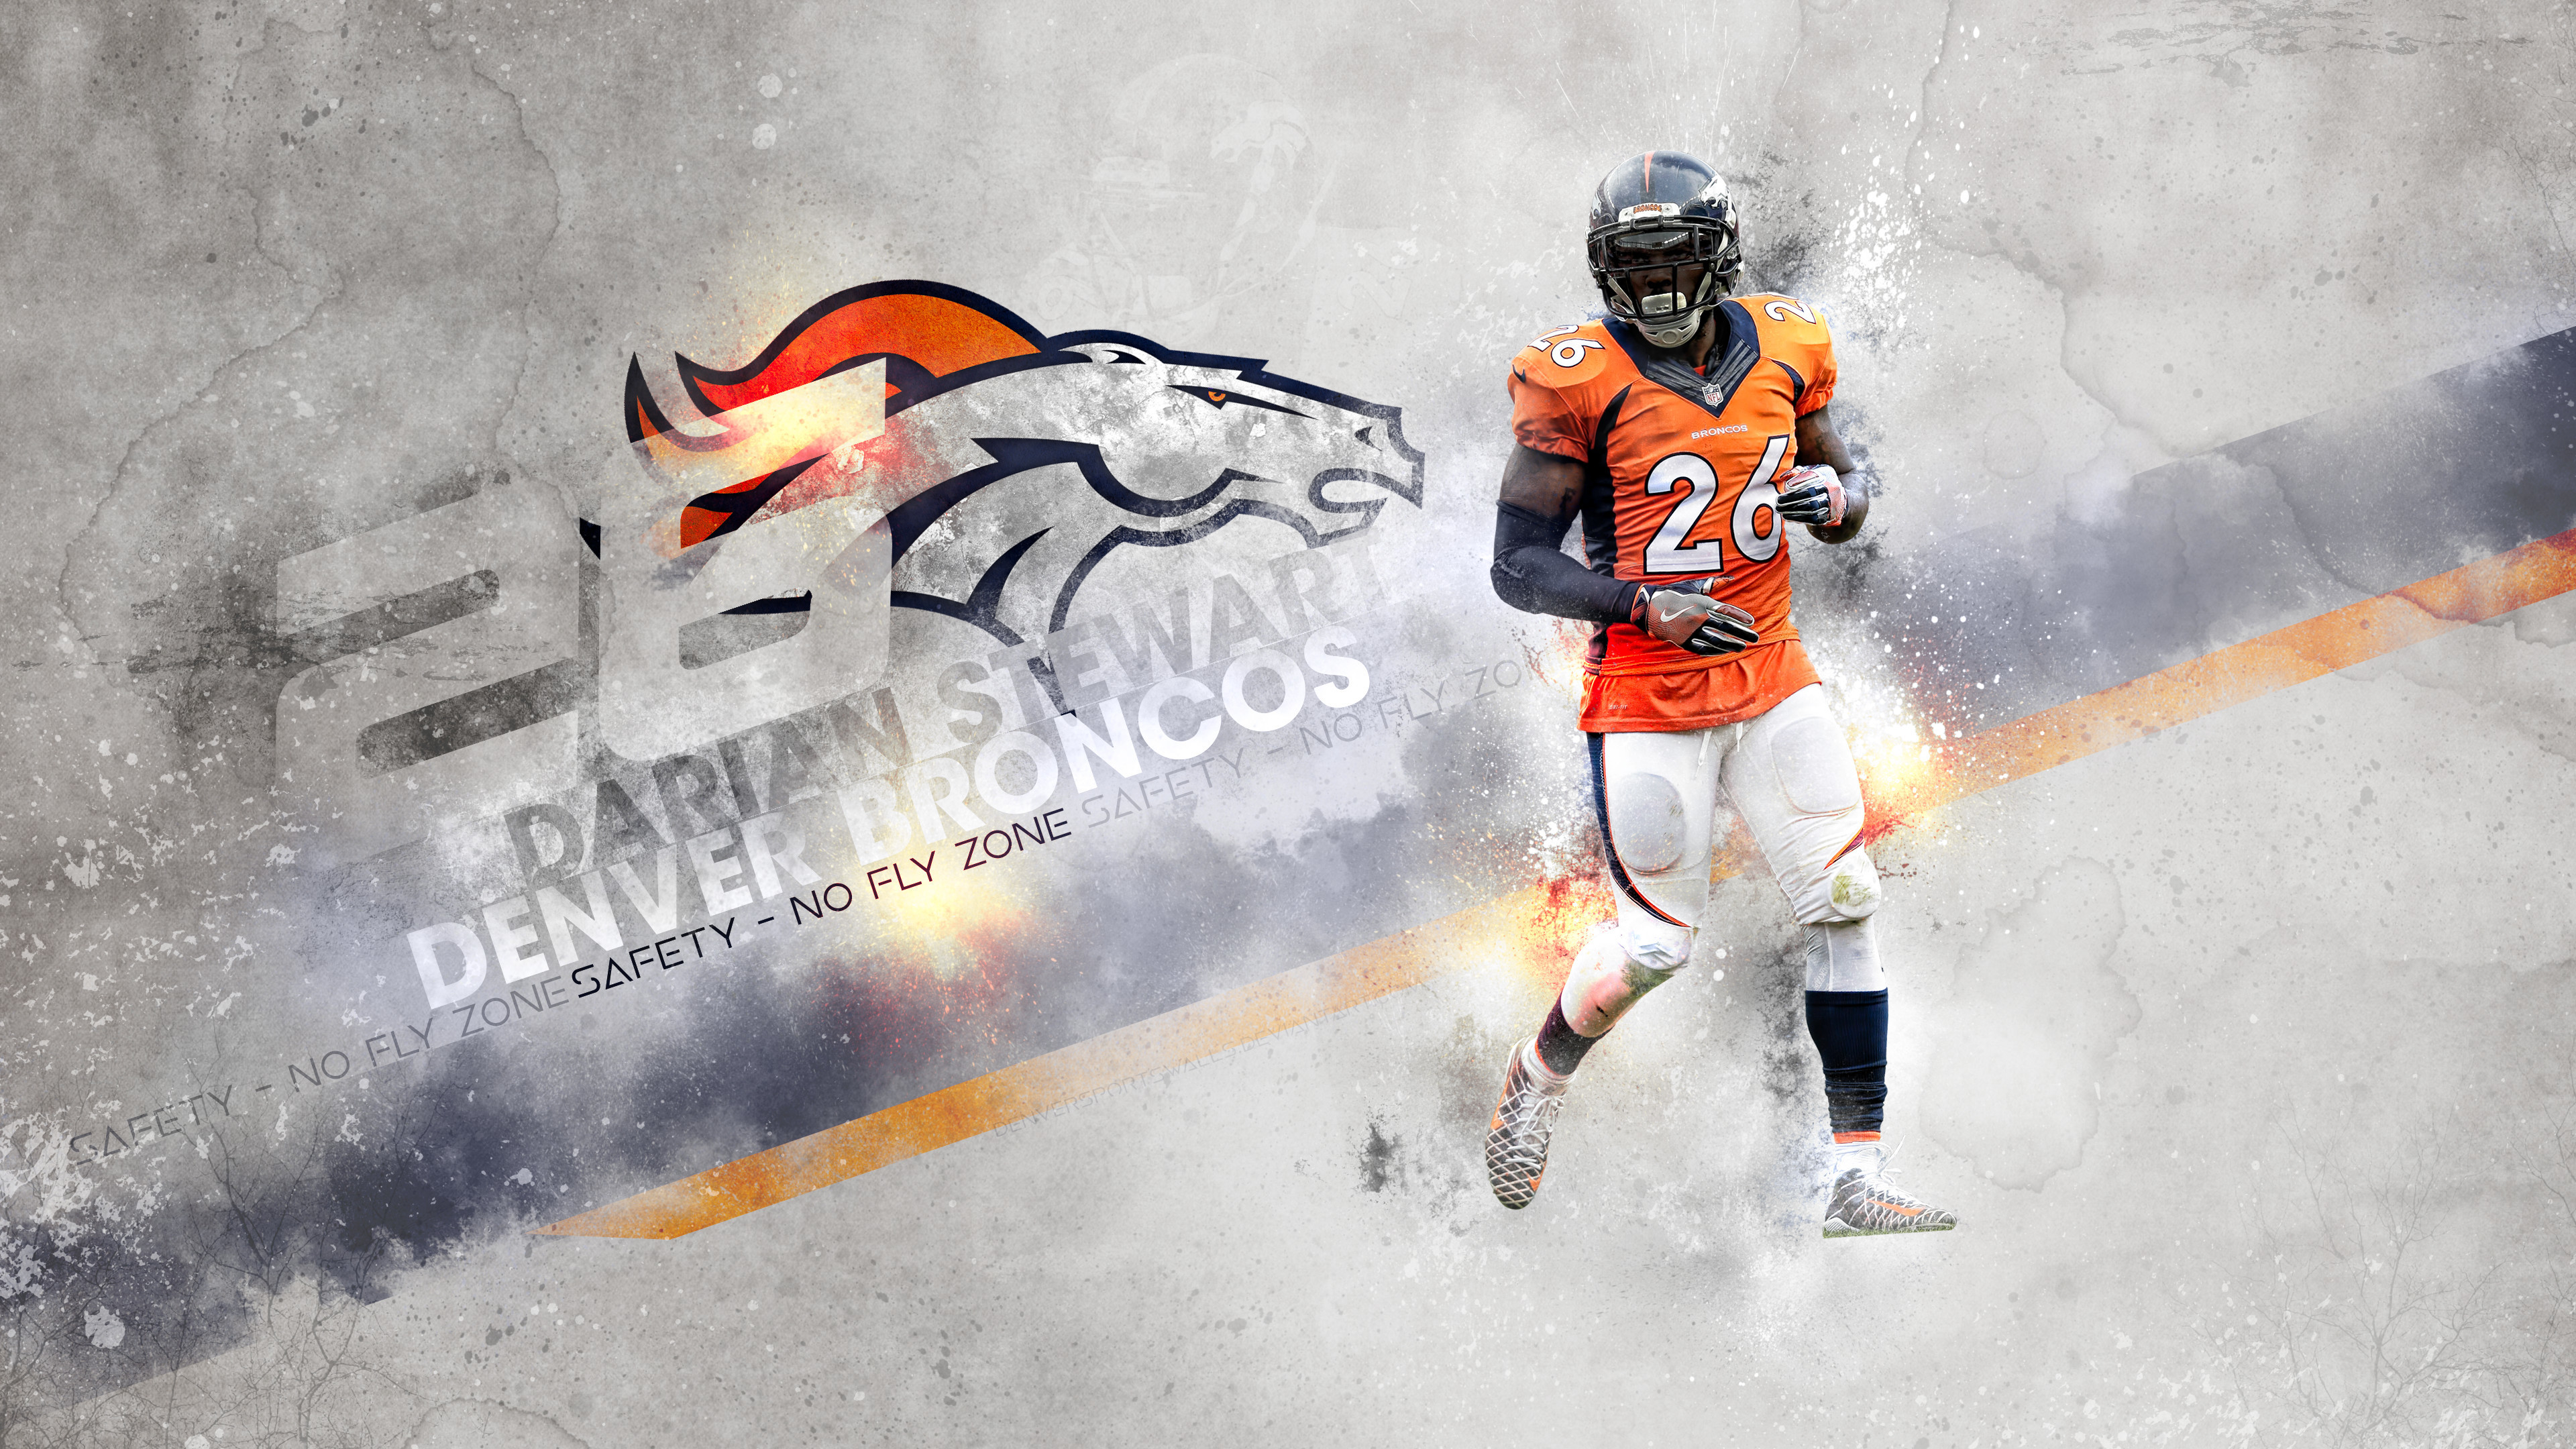 3840x2160 1920x1080 Denver Broncos Wallpapers 74+ - Page 2 of 3 - yese69.com - 4K  Wallpapers World